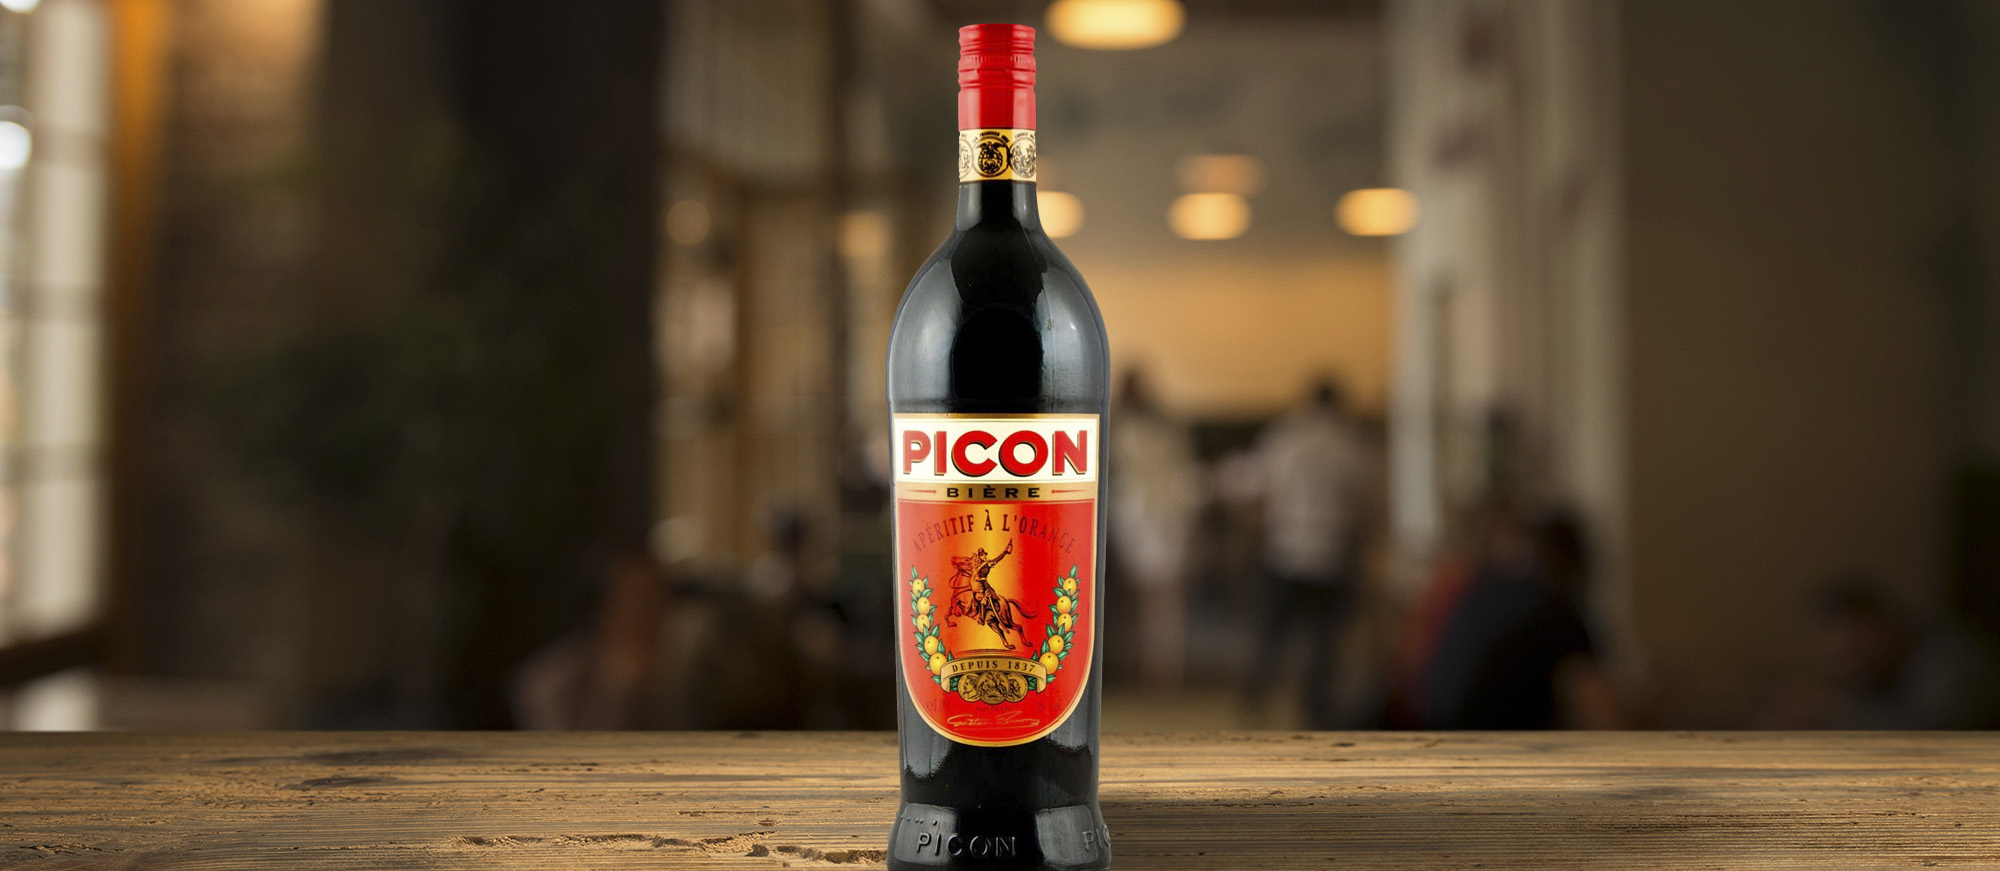 Picon Local Orange Liqueur From Marseille France,Types Of Countertops Materials